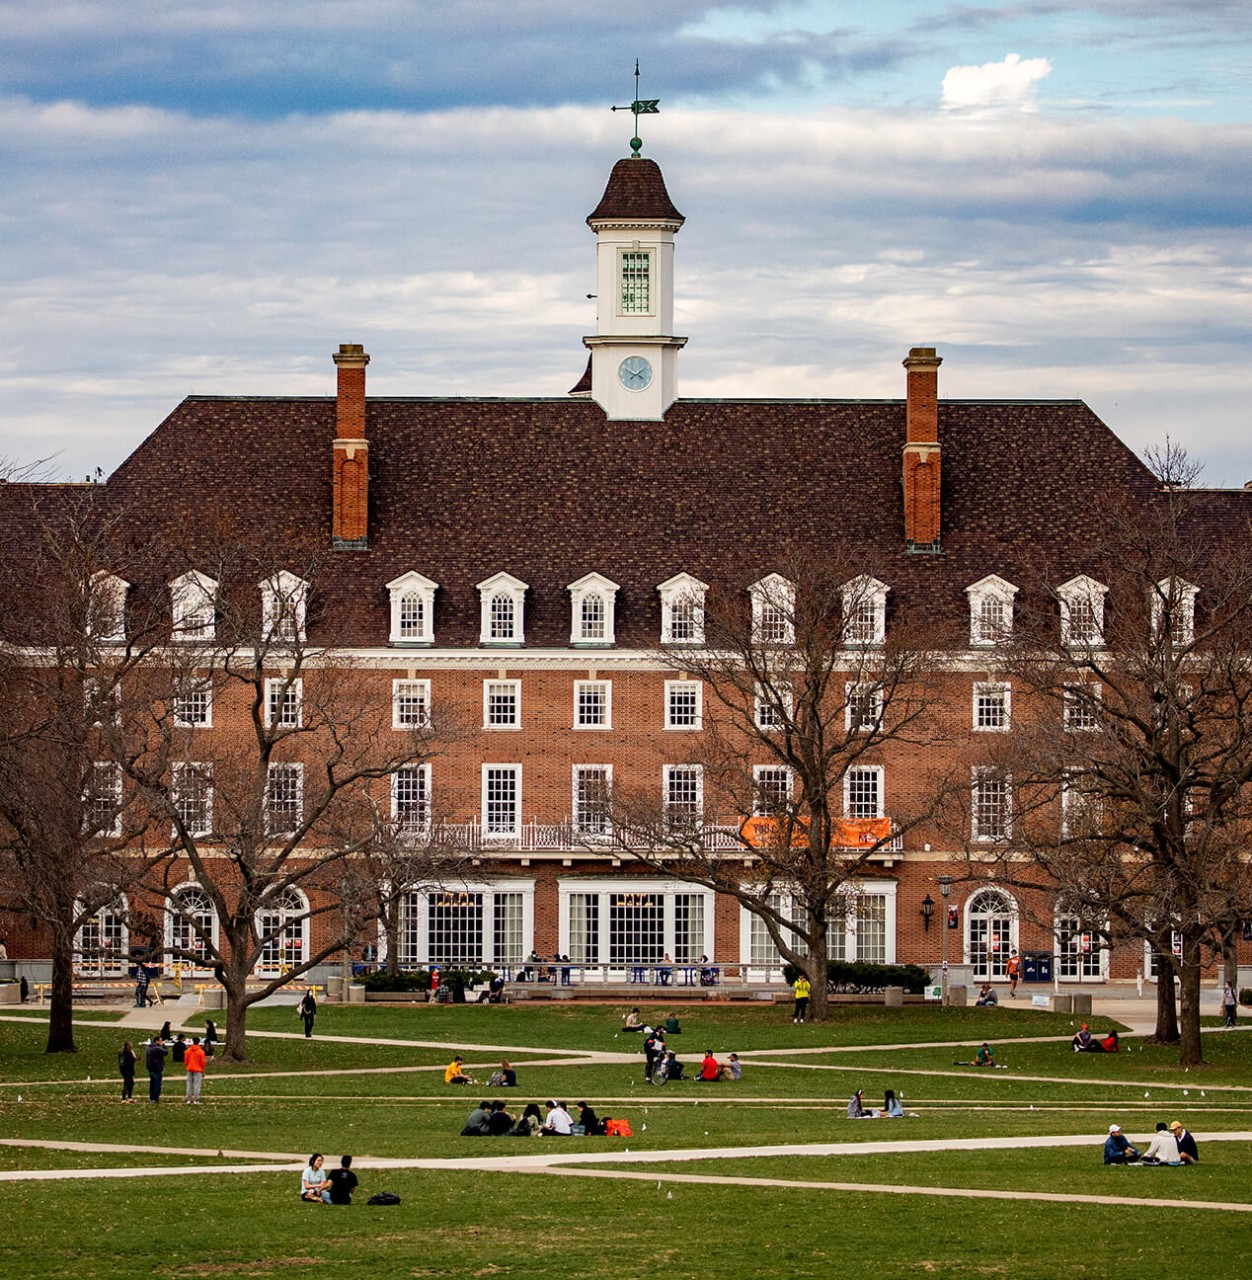 urbana-champaign-is-one-of-the-best-college-towns-in-america-university-of-illinois-alumni